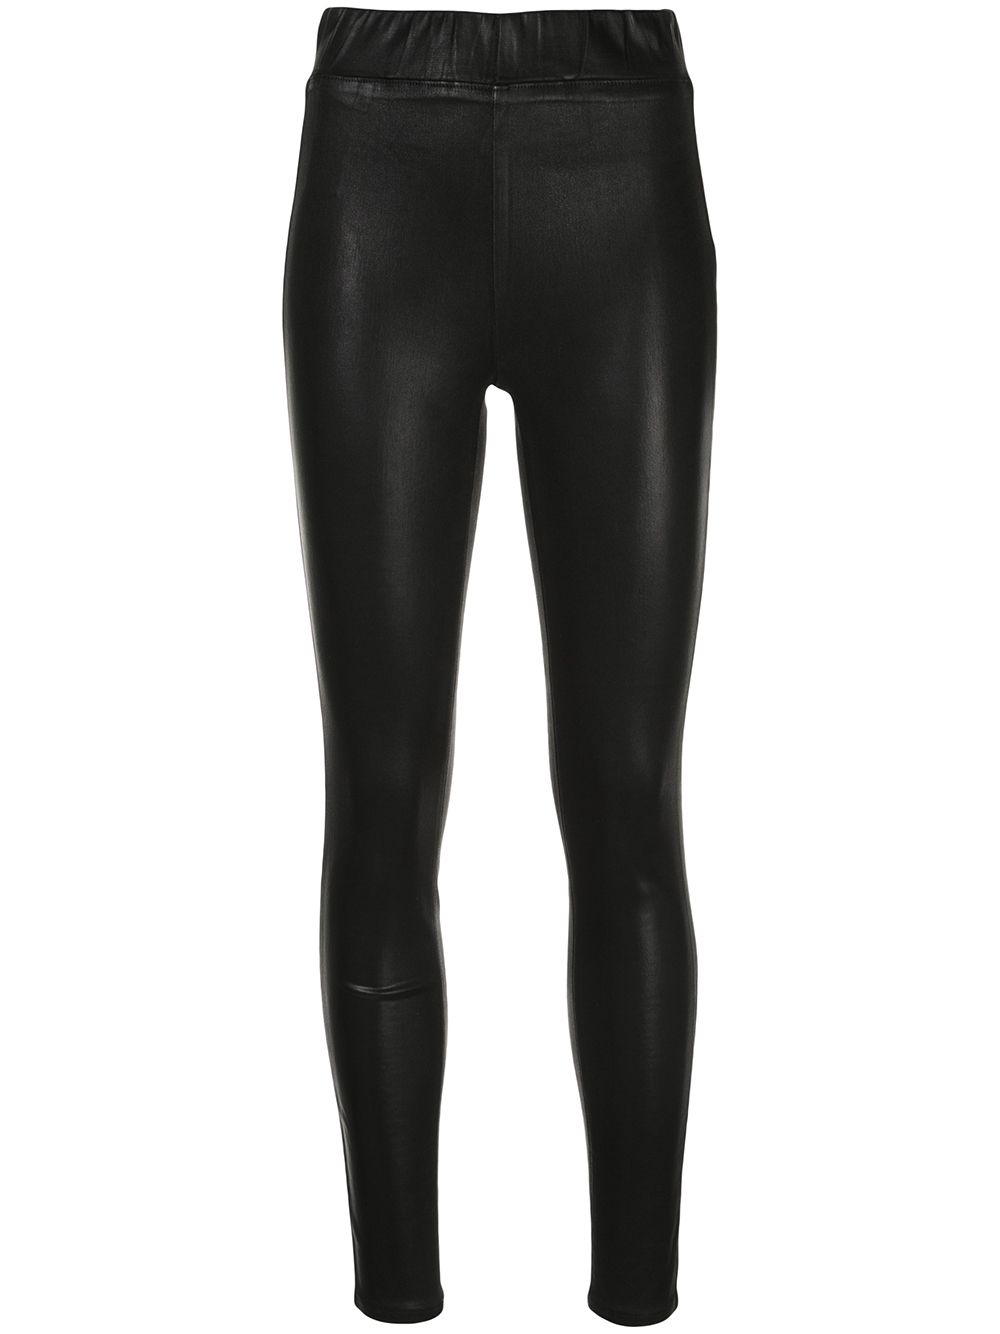 L'Agence high-rise fitted leggings - Black von L'Agence